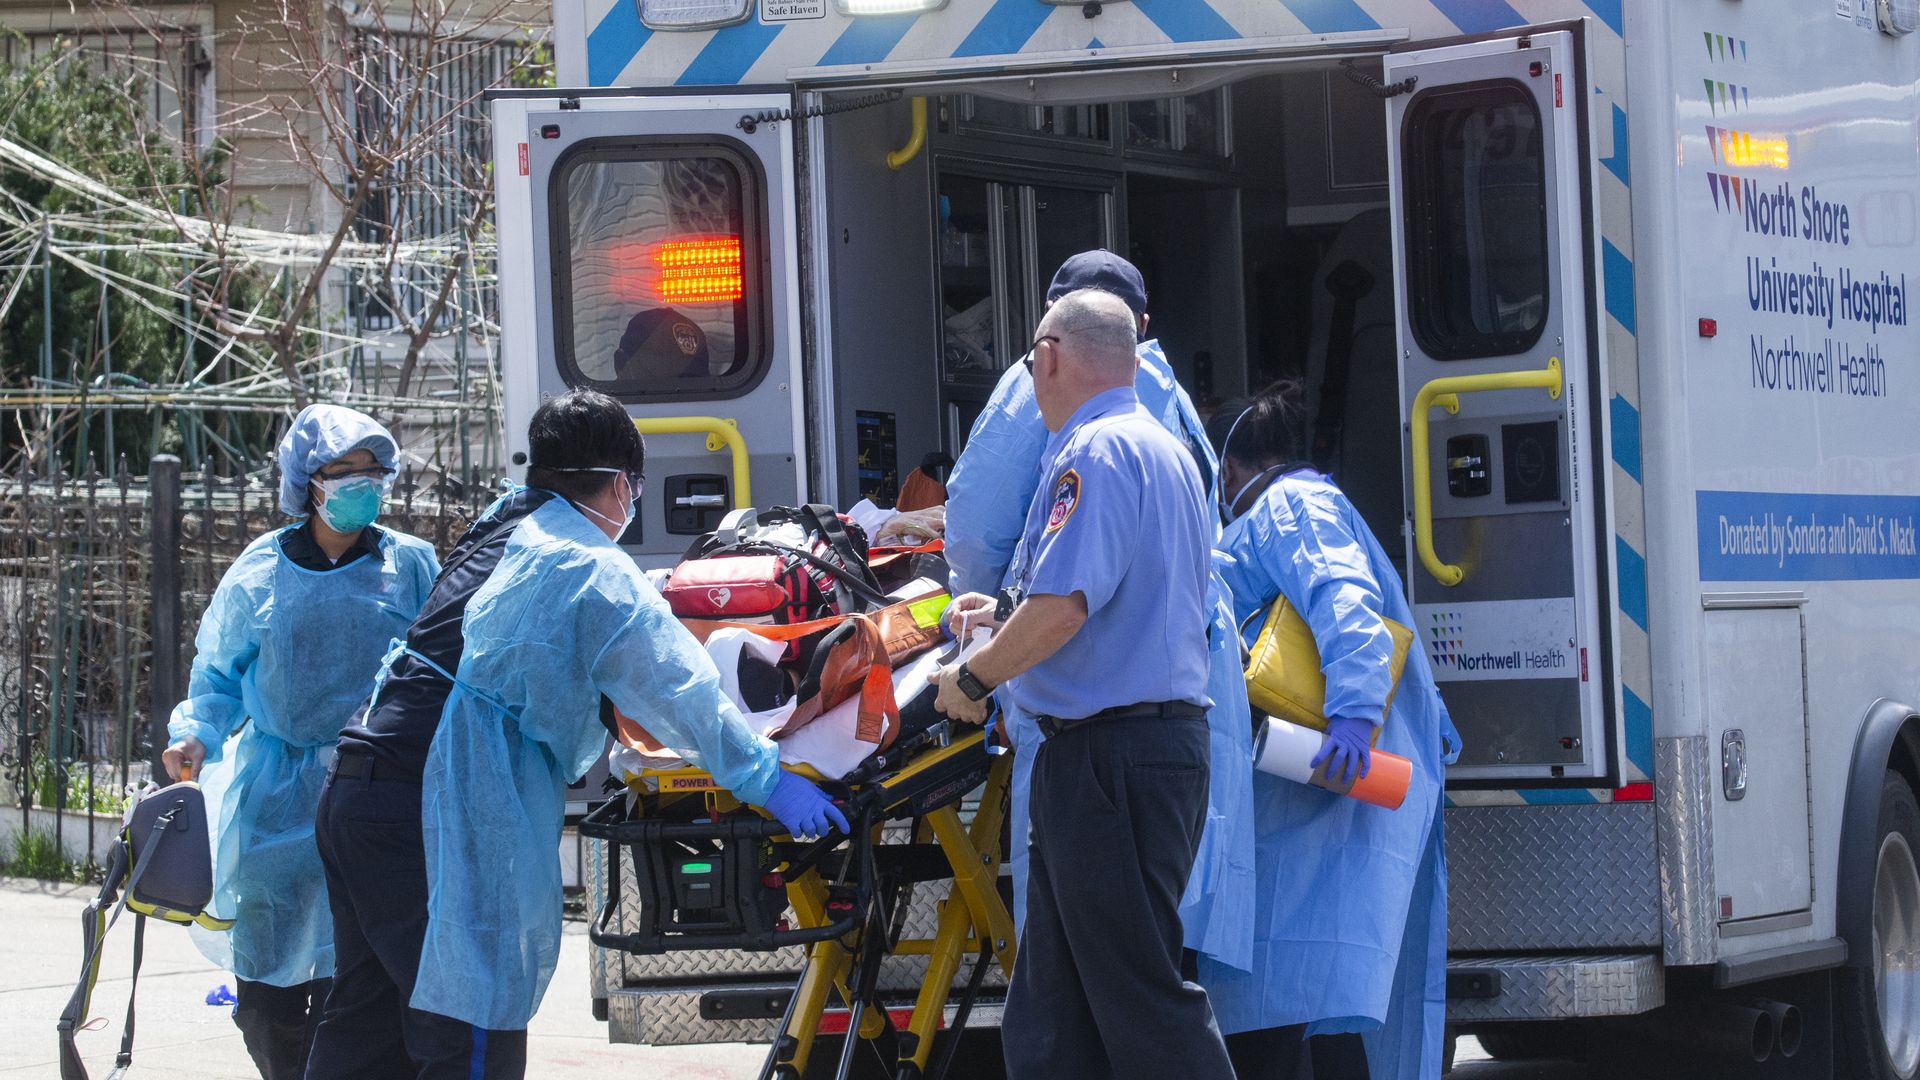 Medics in blue gowns load a coronavirus patient onto a stretcher and into an ambulance.